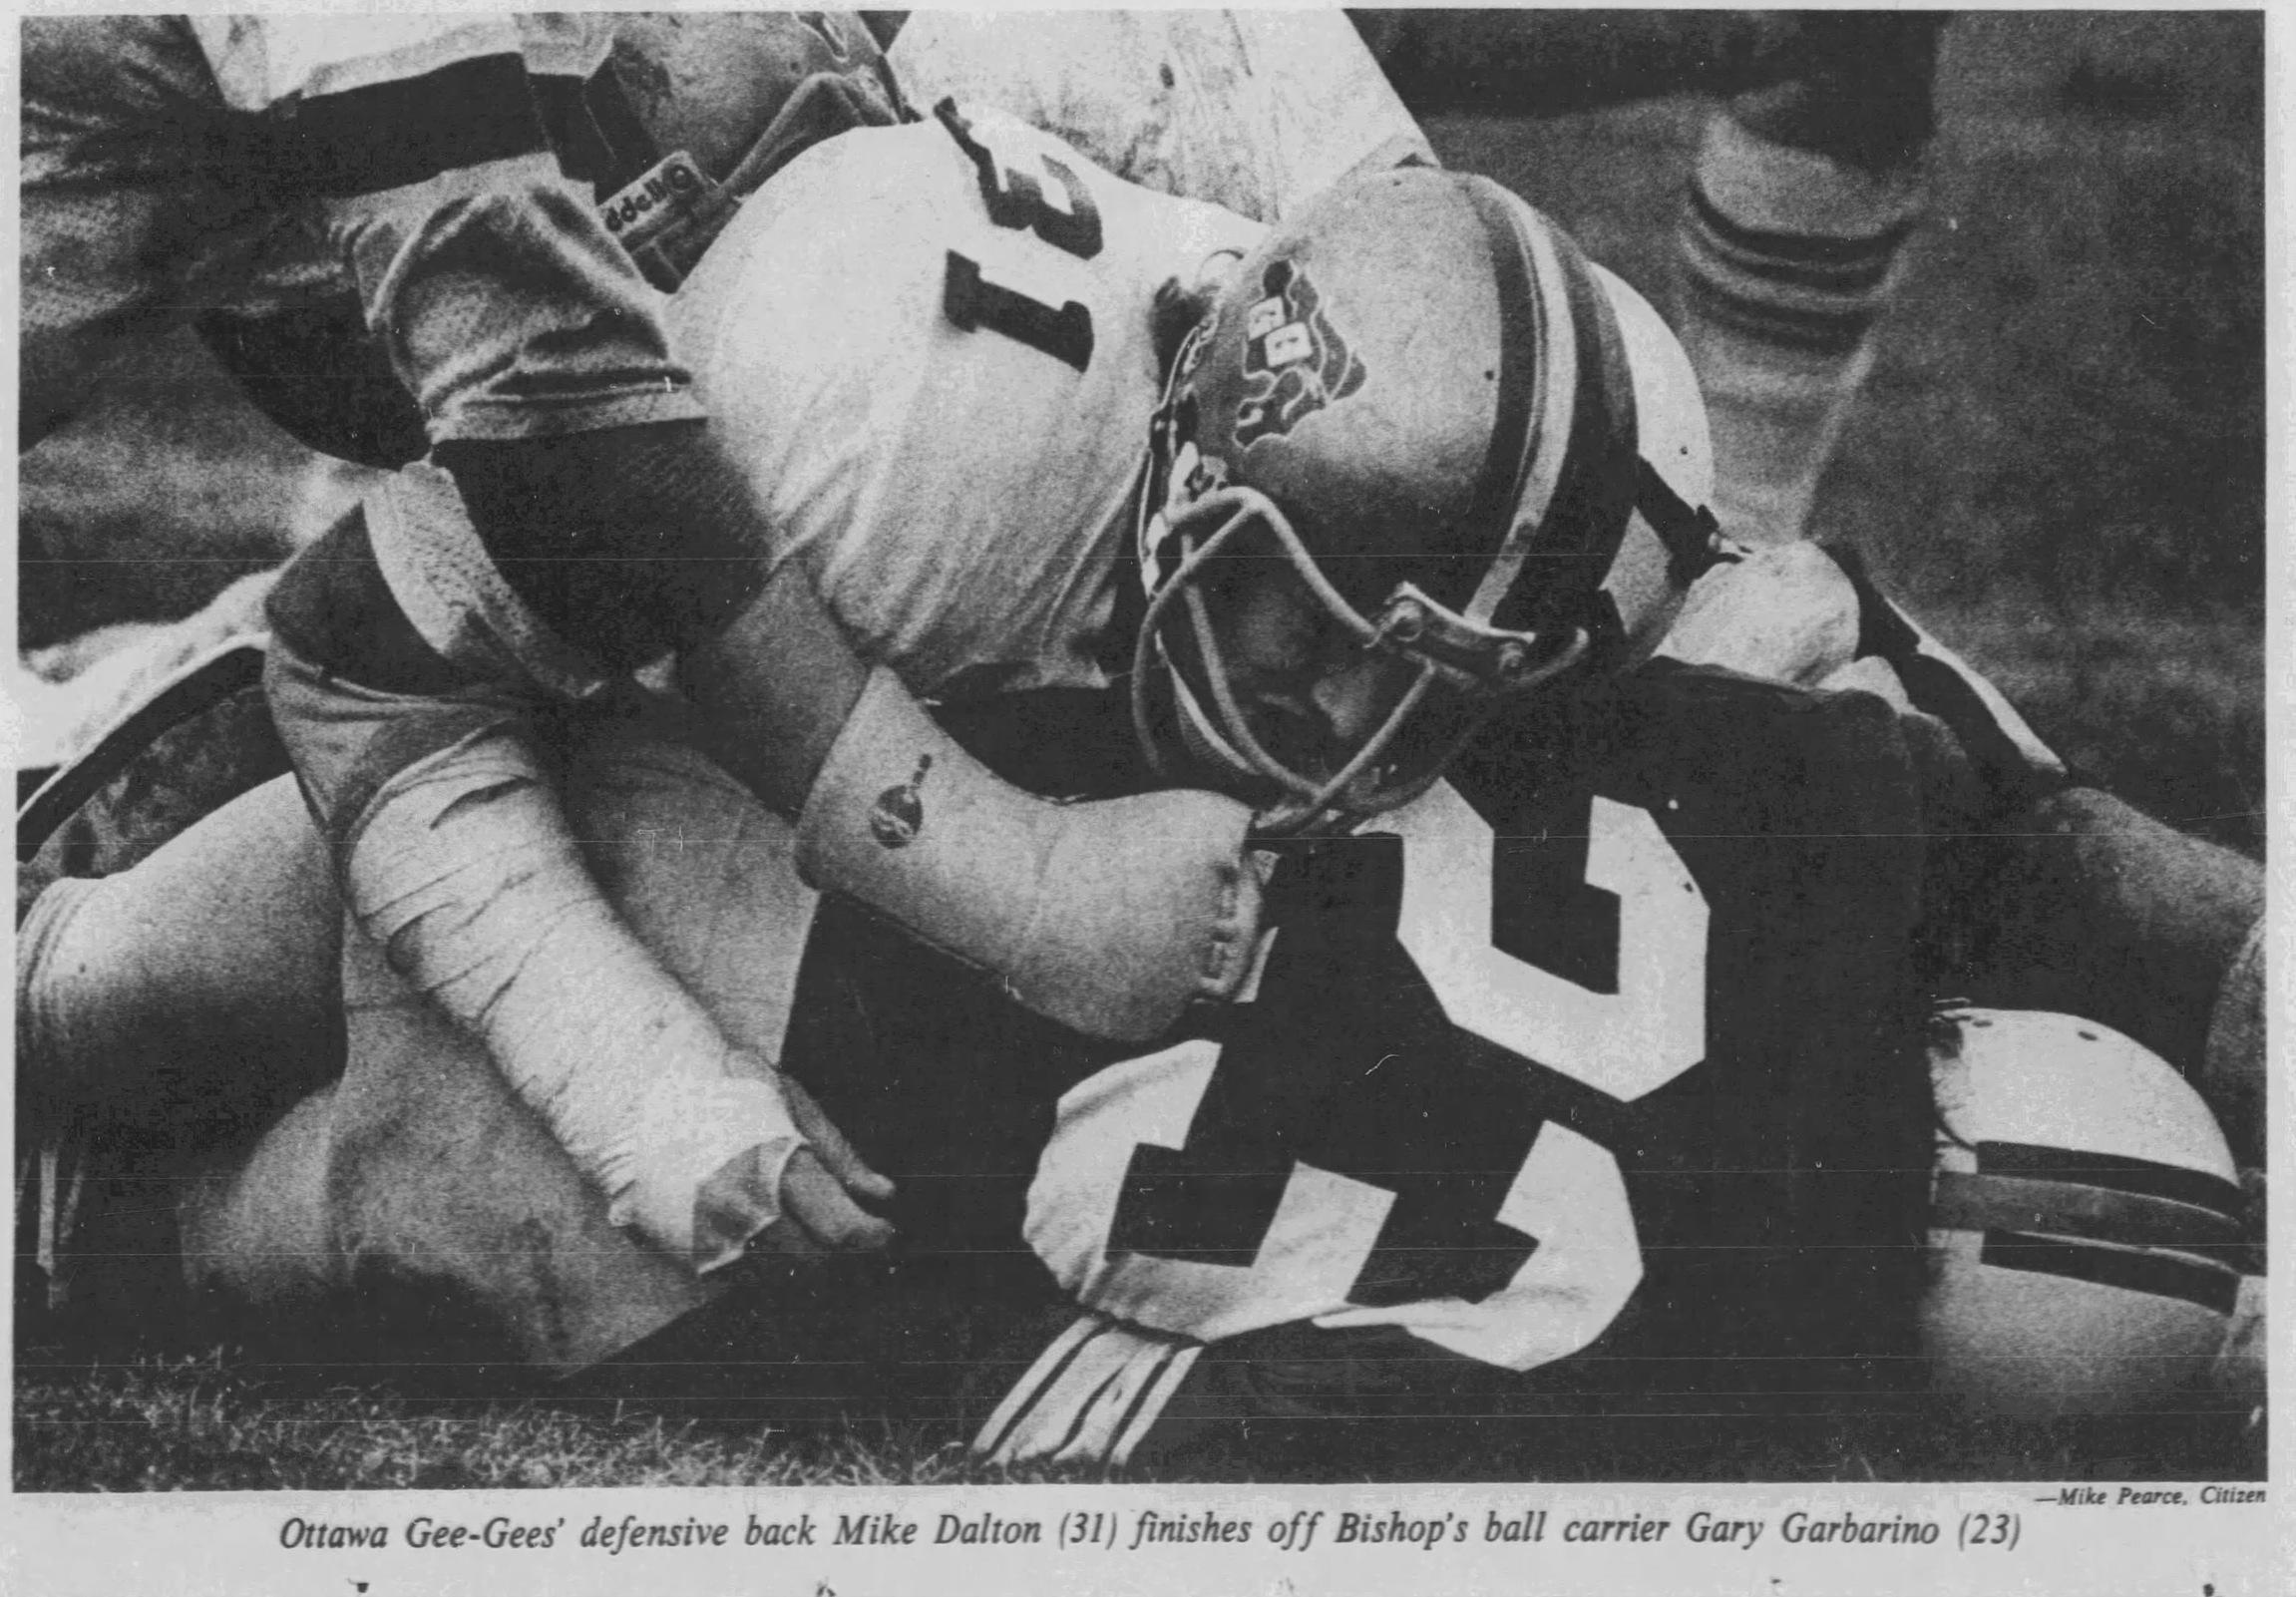 Black and white newspaper clipping shows a Gee-Gees player tackling an opponent. Caption text below reads: Ottawa Gee-Gees' defensive back Mike Dalton (31) finishes off Bishop's ball carrier Gary Garbino (23) - Mike Pearce, Citizen